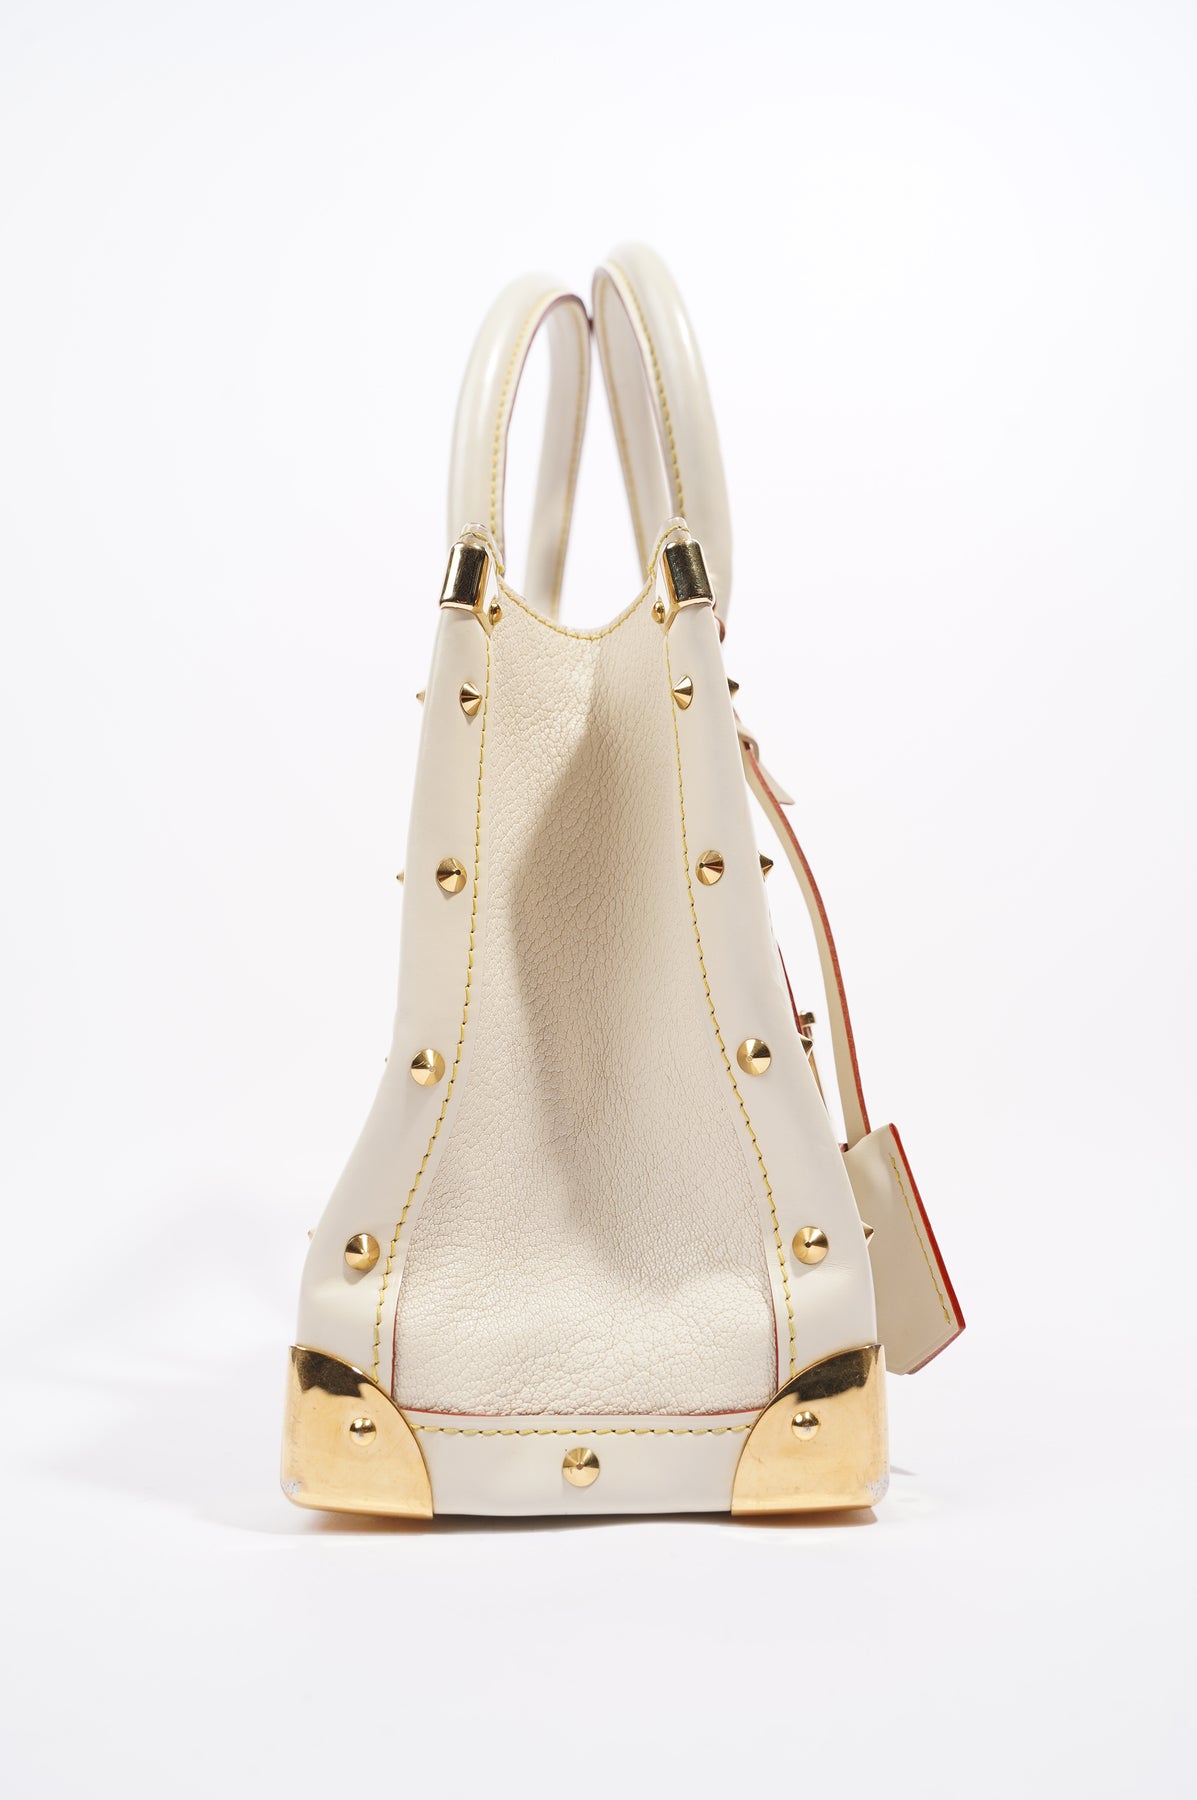 🔥VGC Louis Vuitton Suhali Shoulder Tote Bag in Ivory 🔥, Luxury